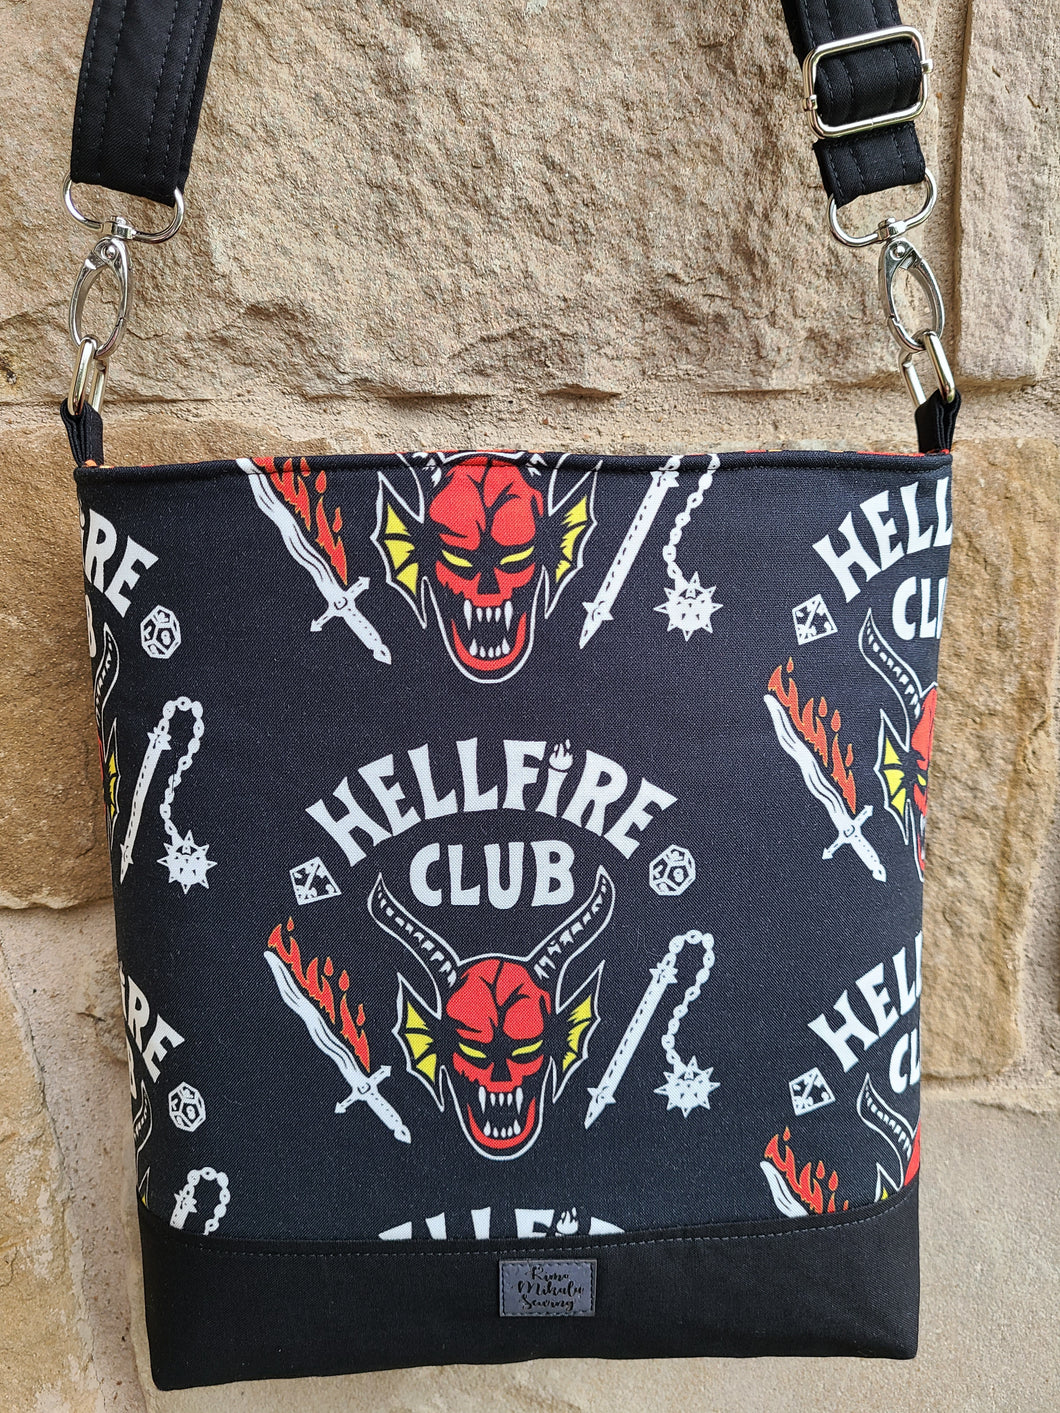 Messenger Bag Made With Fire Dungeon Club Inspired Fabric - Adjustable Strap - Zippered Closure - Zippered Pocket - Cross Body Bag